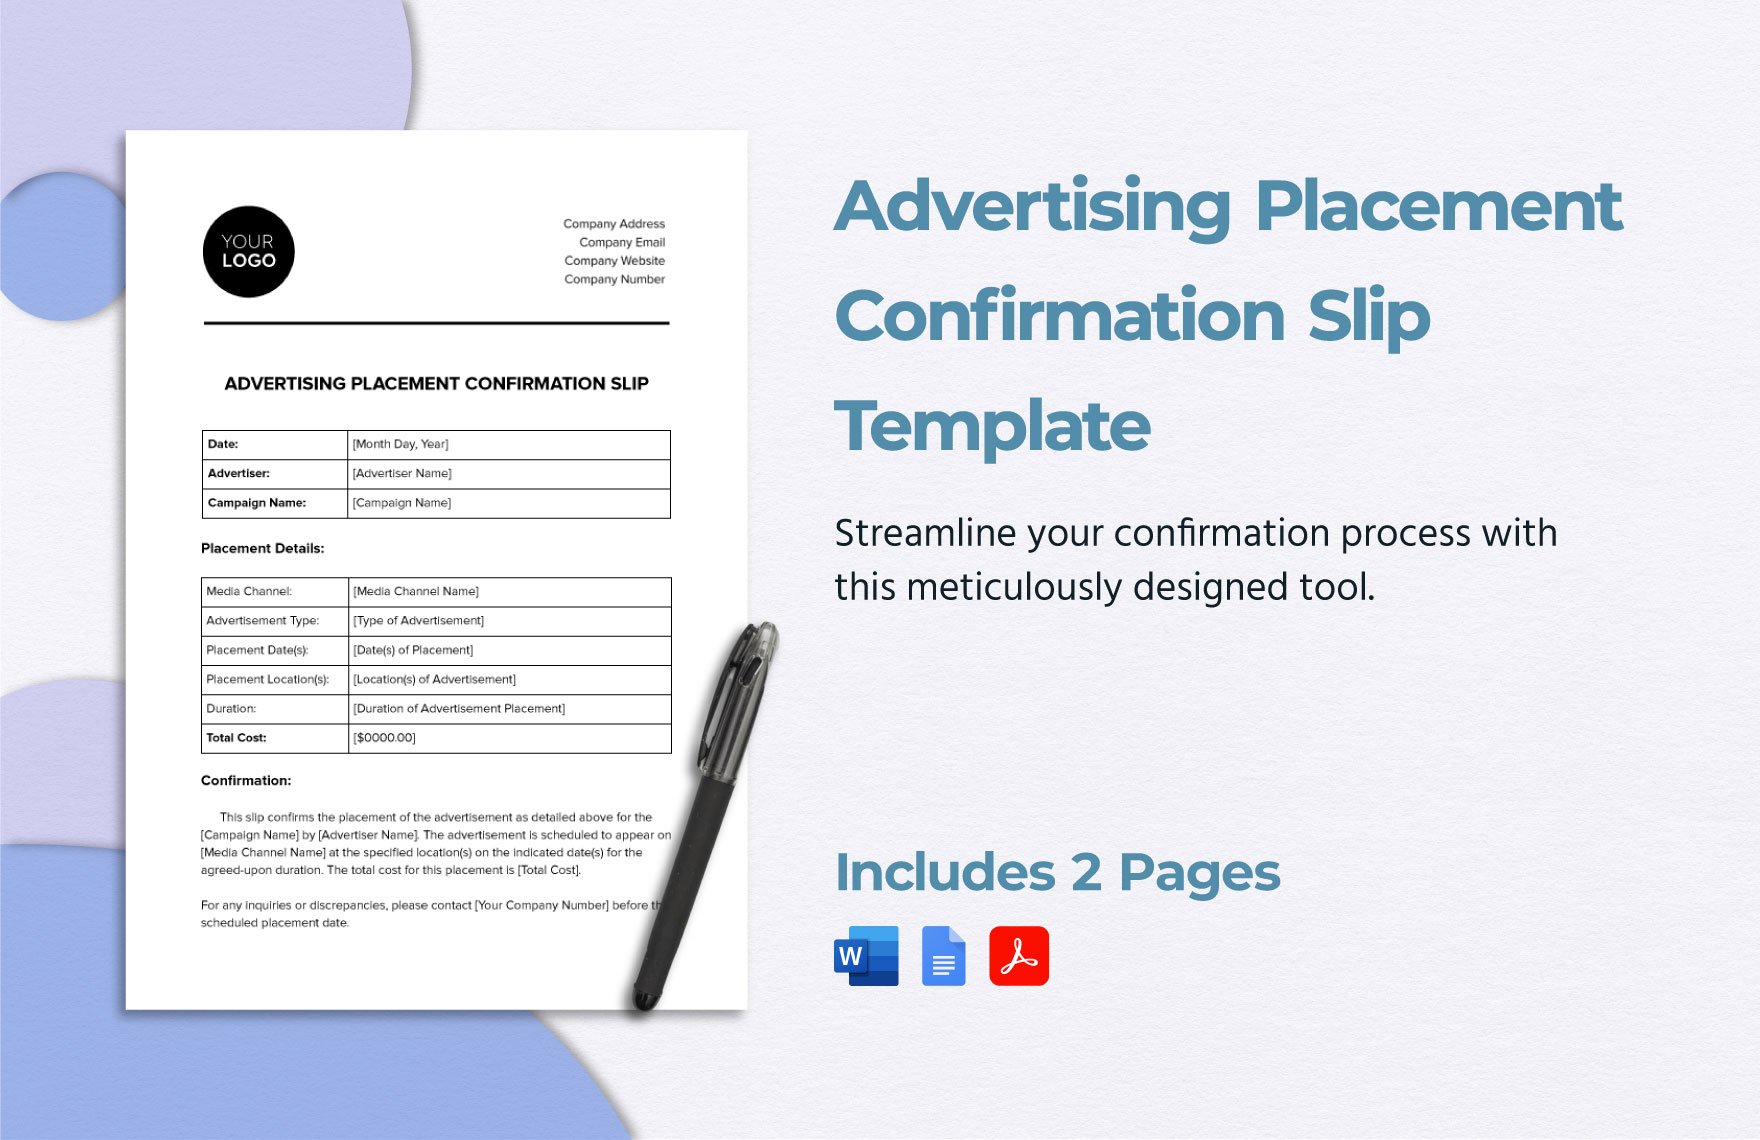 Advertising Placement Confirmation Slip Template